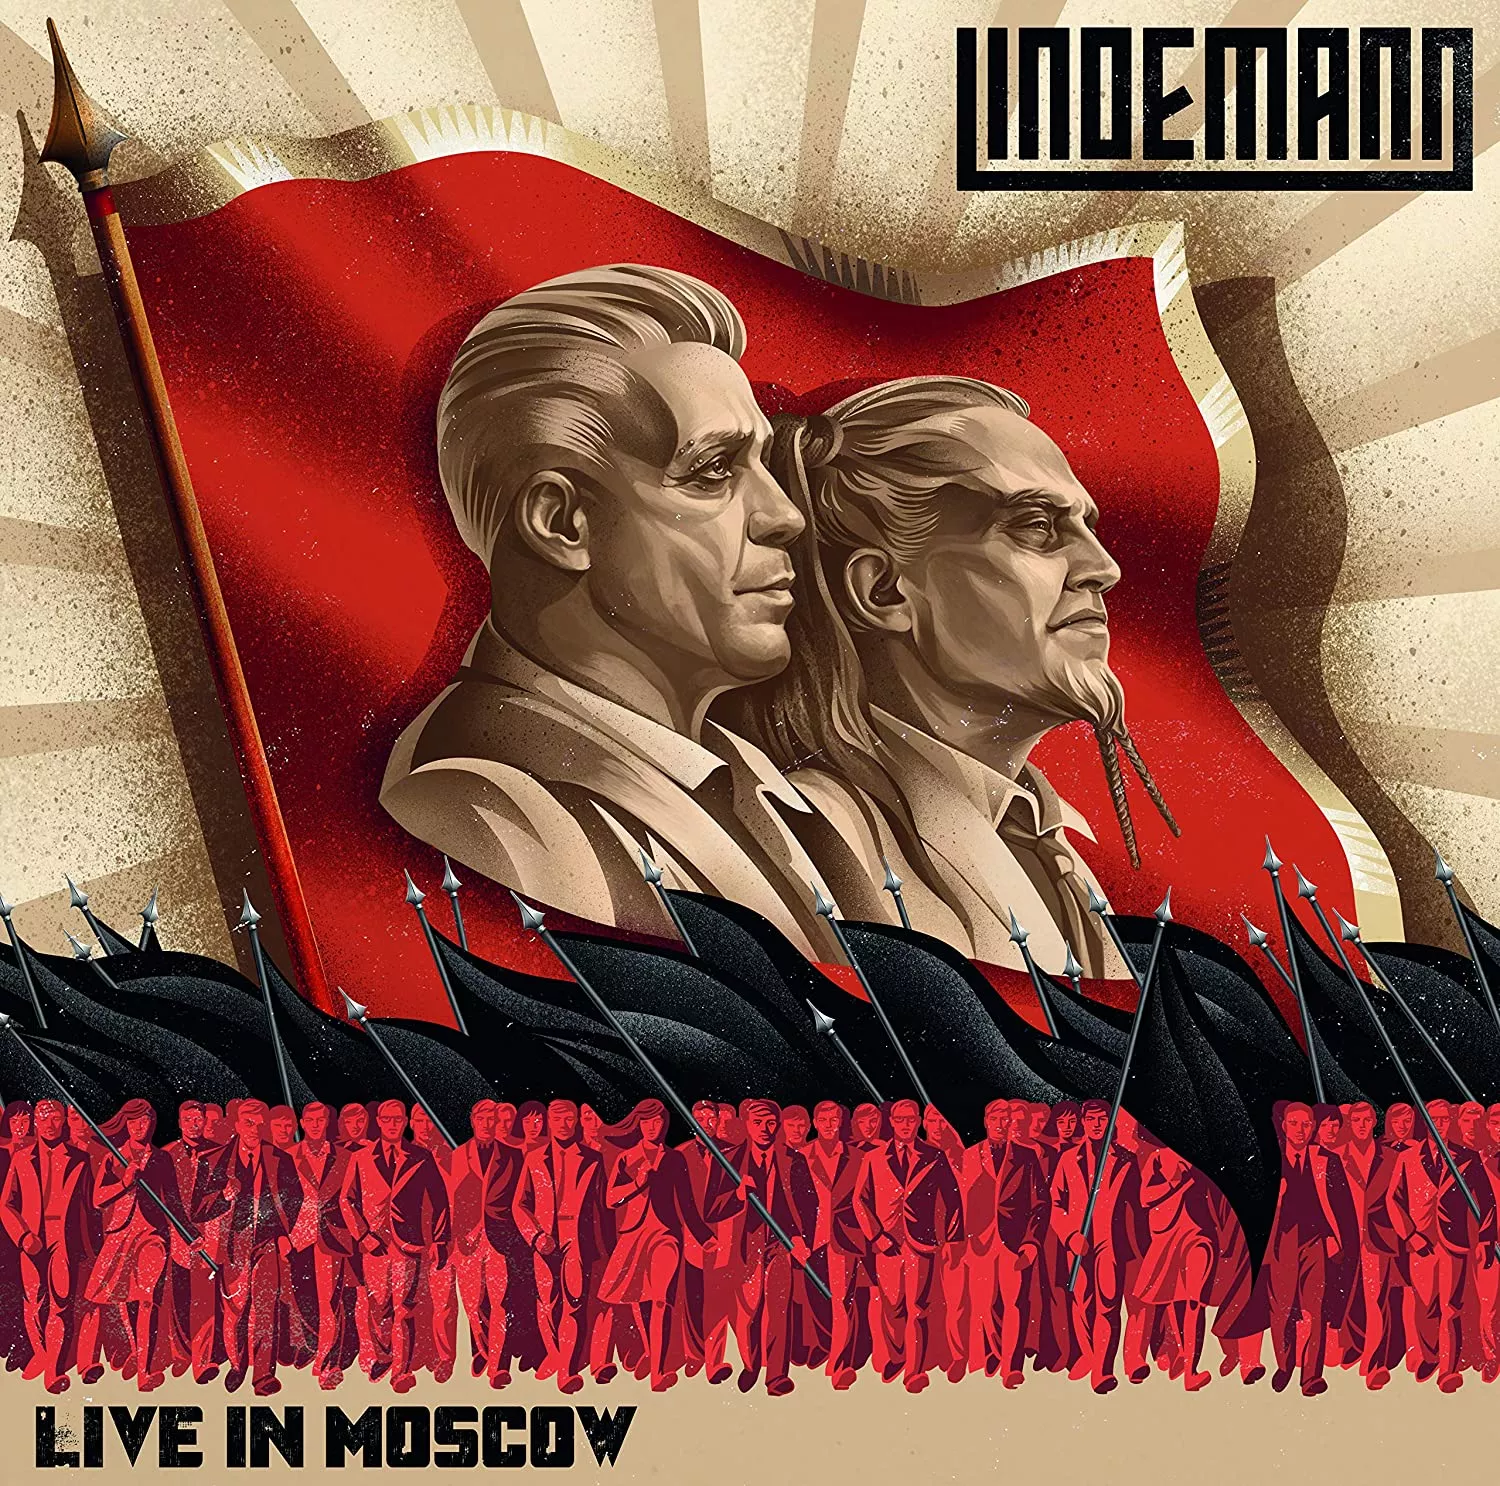 Live in Moscow - Lindemann